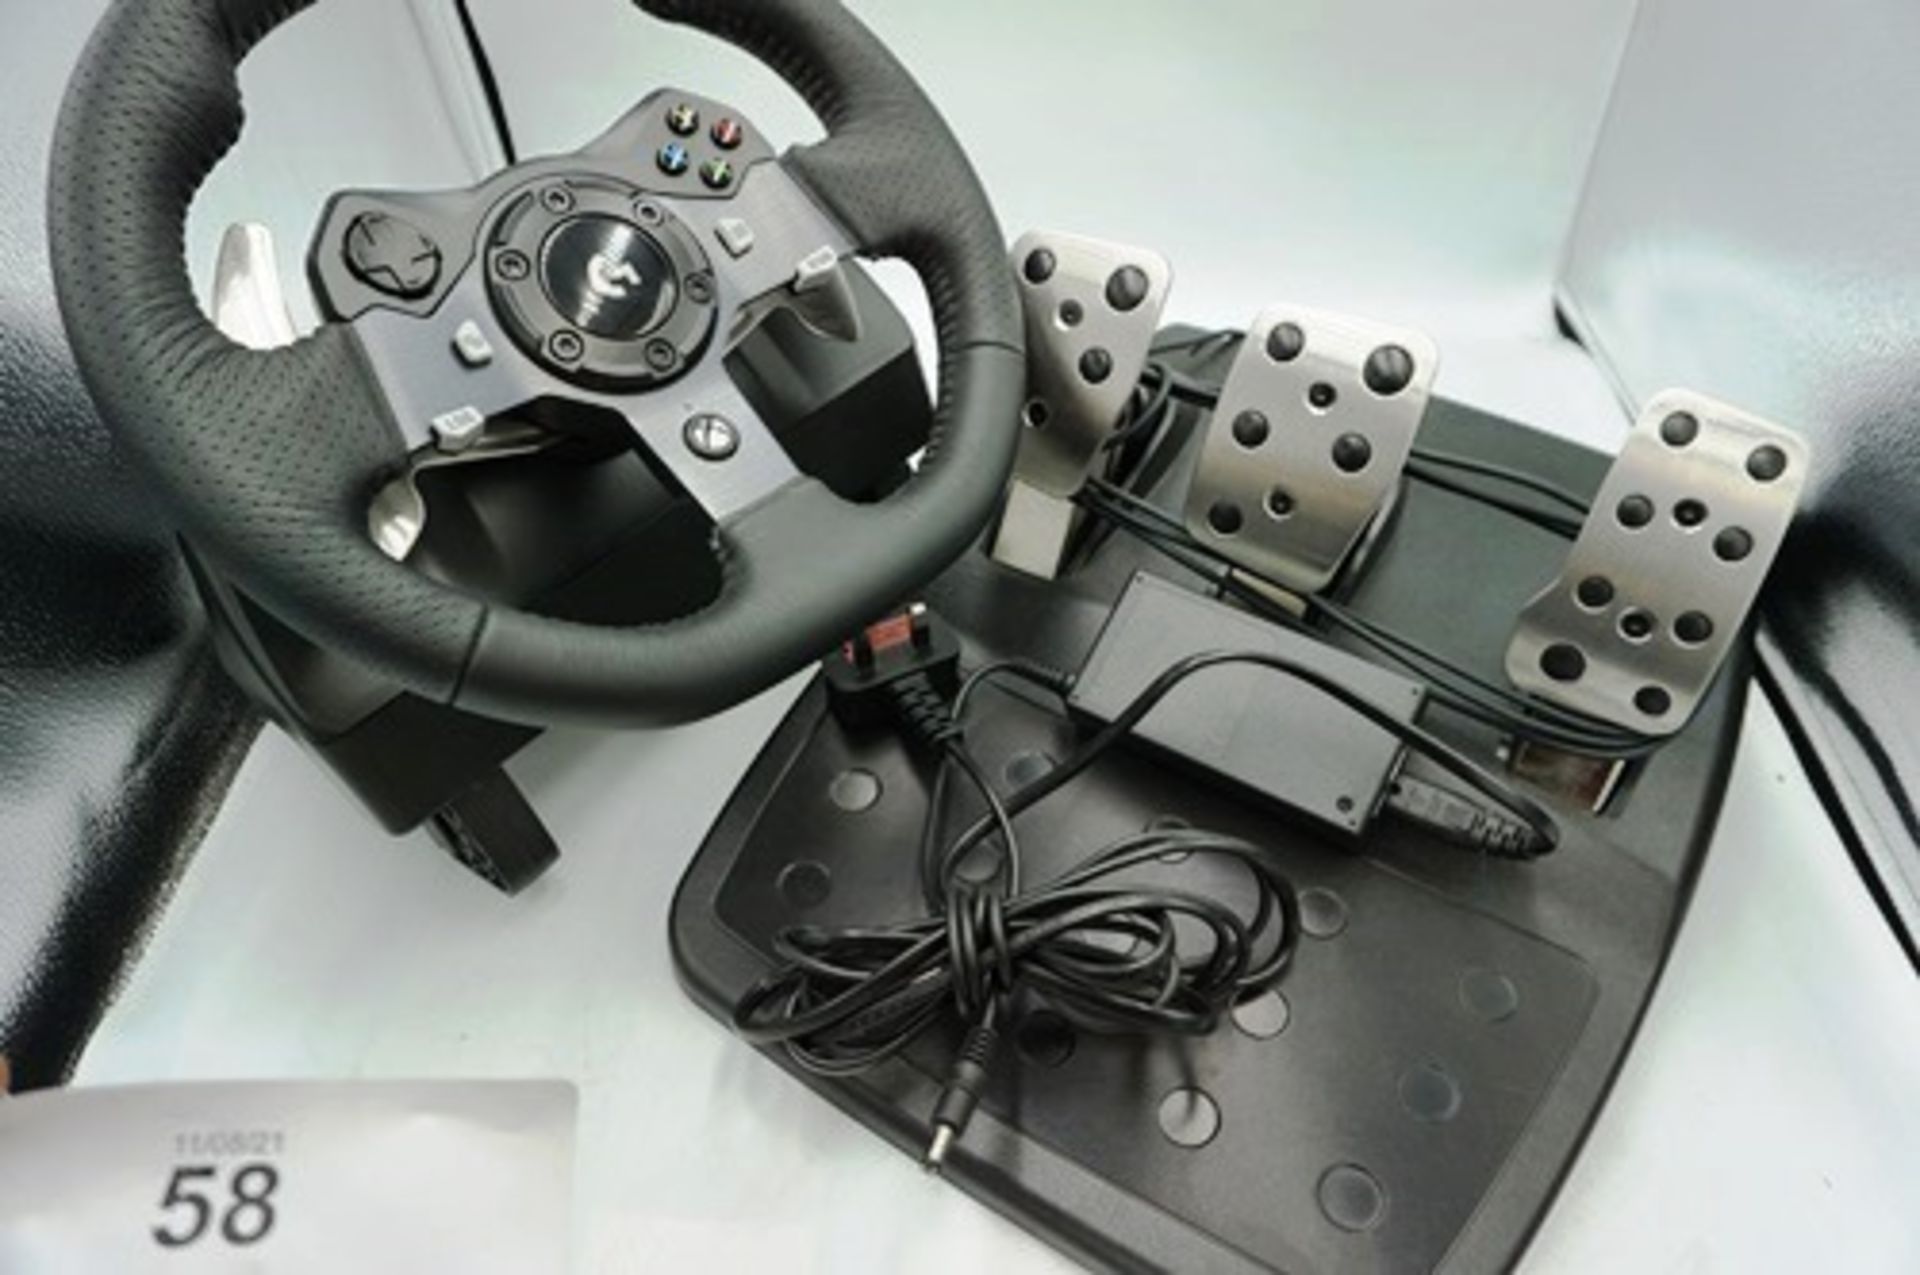 1 x Logitech G920 Force Feedback steering wheel for Xbox One, model W-U0004, powers on, not fully - Image 2 of 5